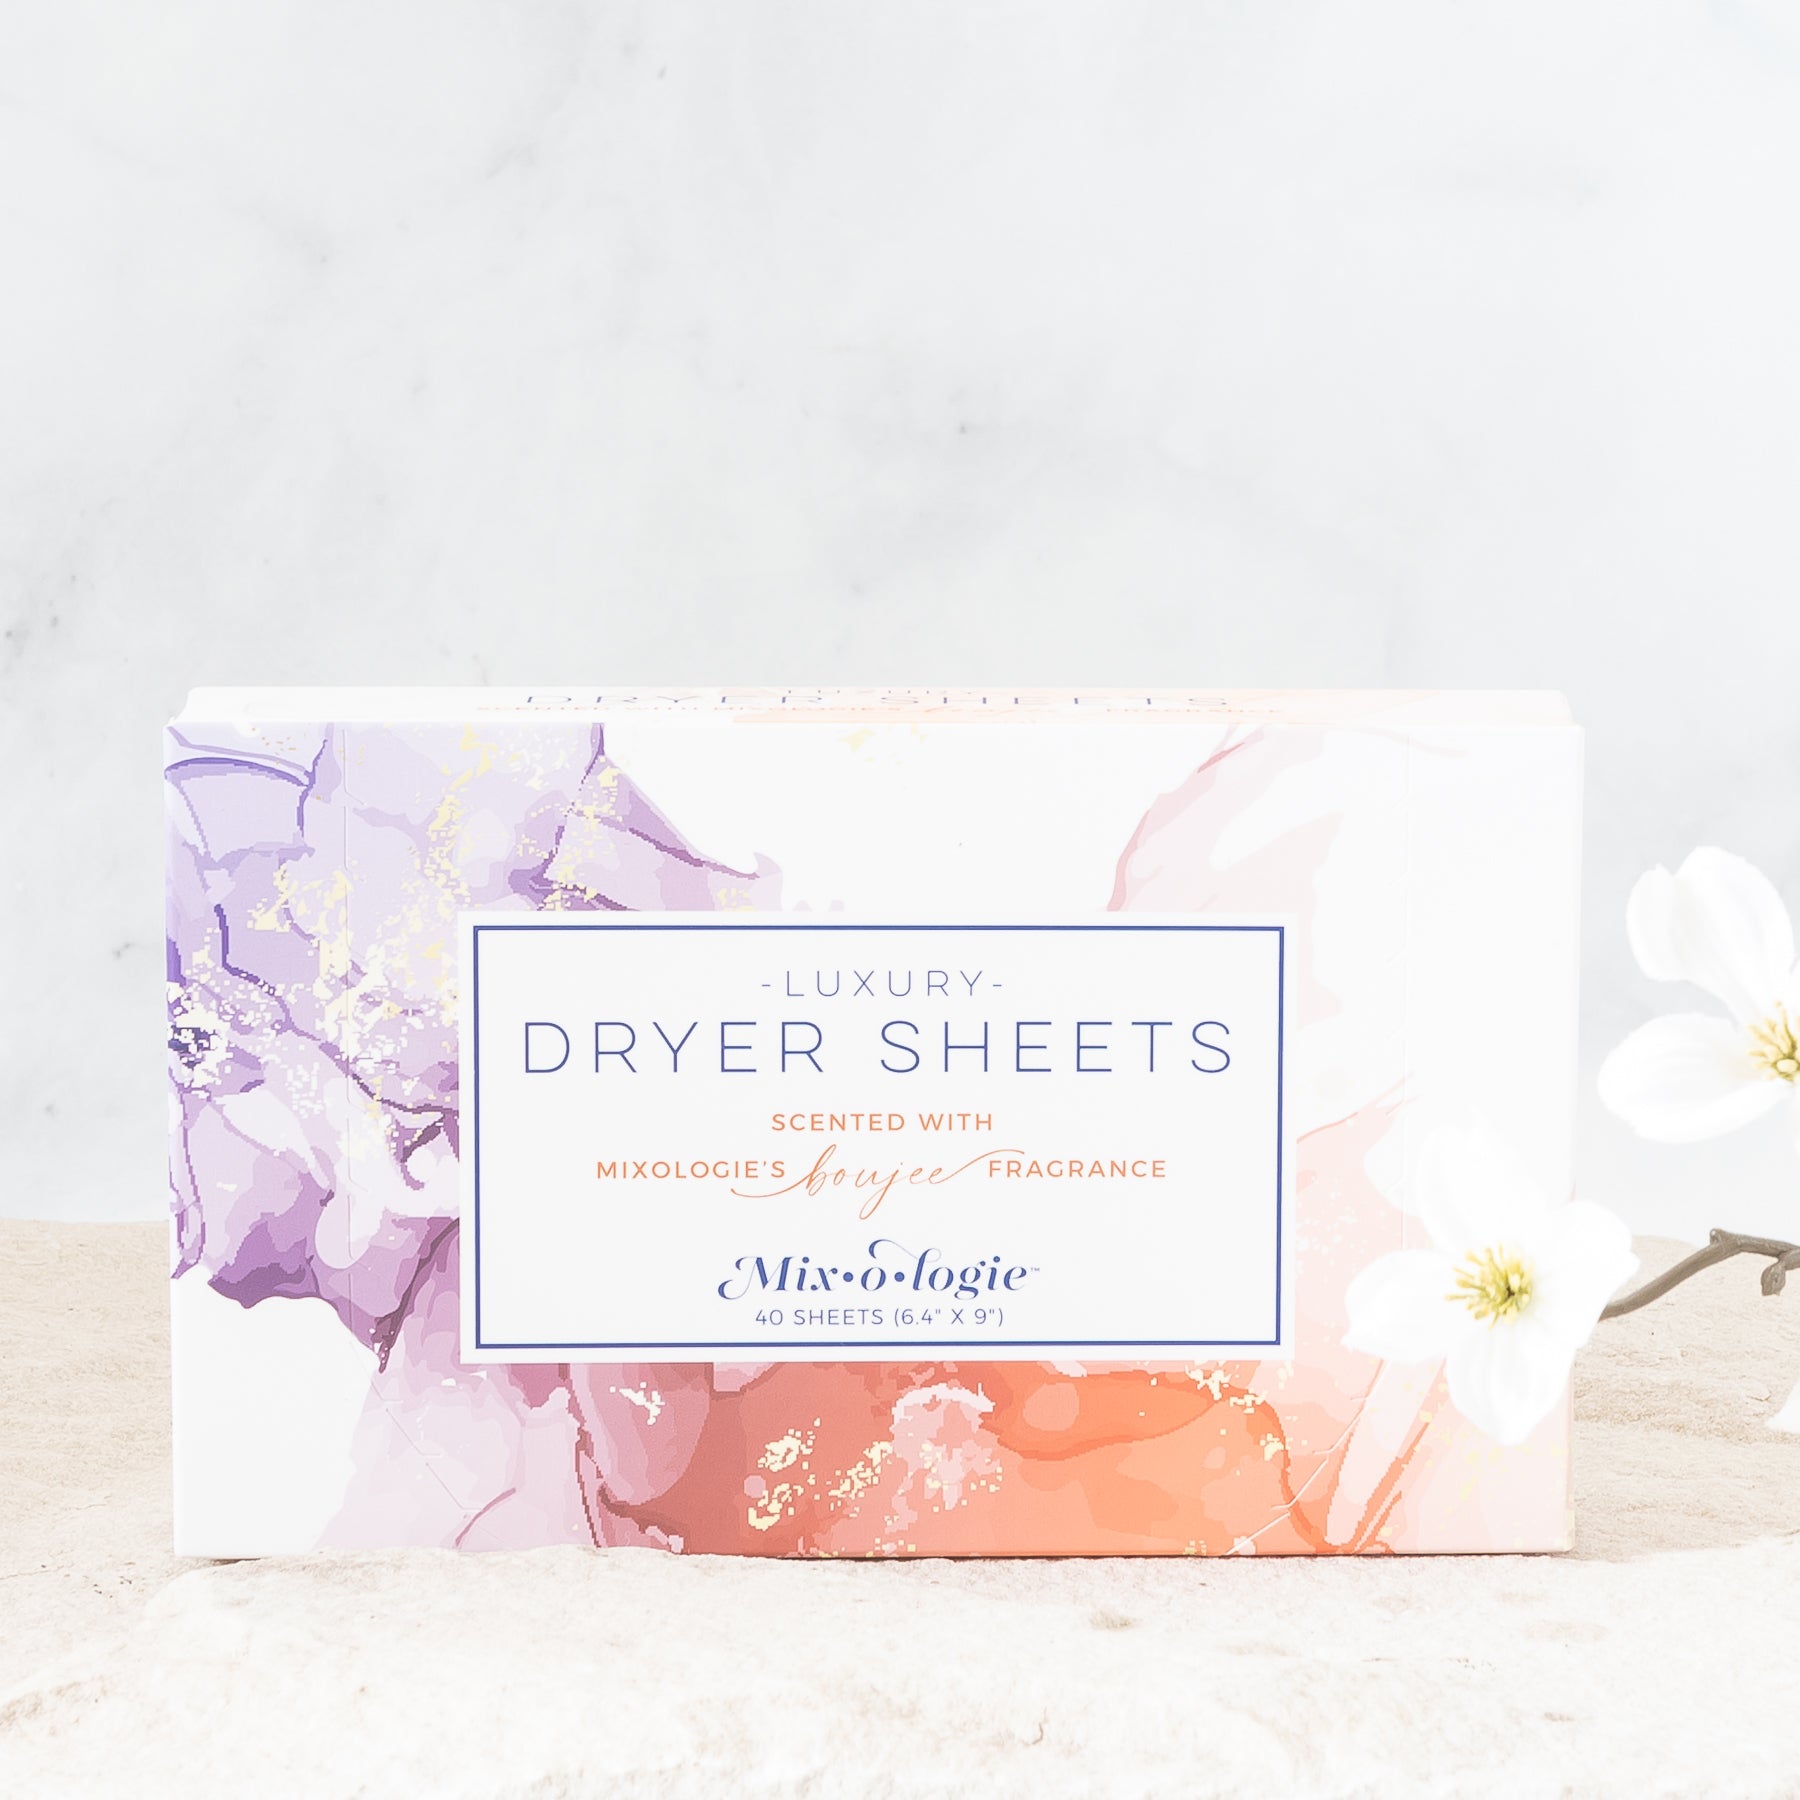 Luxury Dryer Sheets scented with Mixologie's Boujee fragrance. There are 40 sheets in a box, the sheet dimensions are 6.4 inches X 9 inches. Box is purple, pink, and white placed in the sand with white flowers.